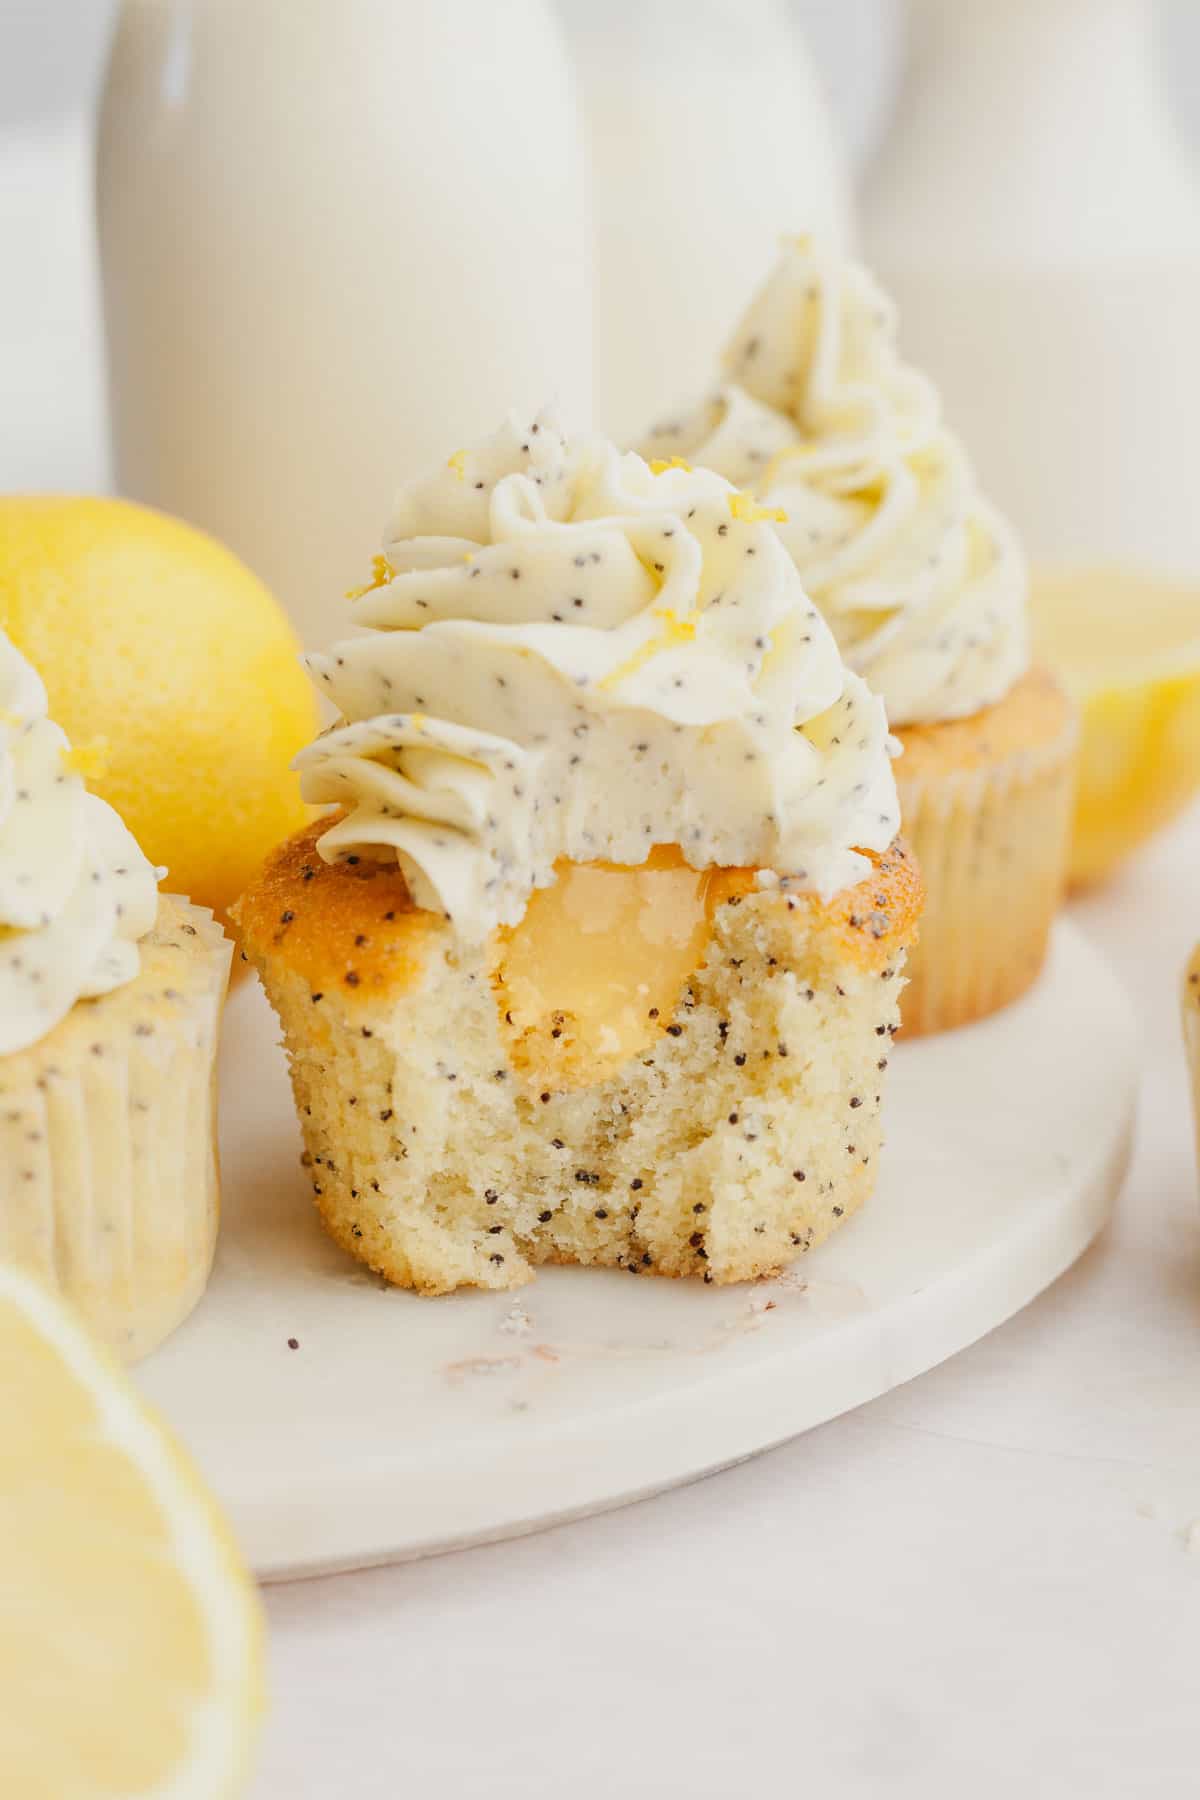 lemon poppy seed cupcake with a bite taken out of it, showing there is lemon curd in the middle of the cupcake.